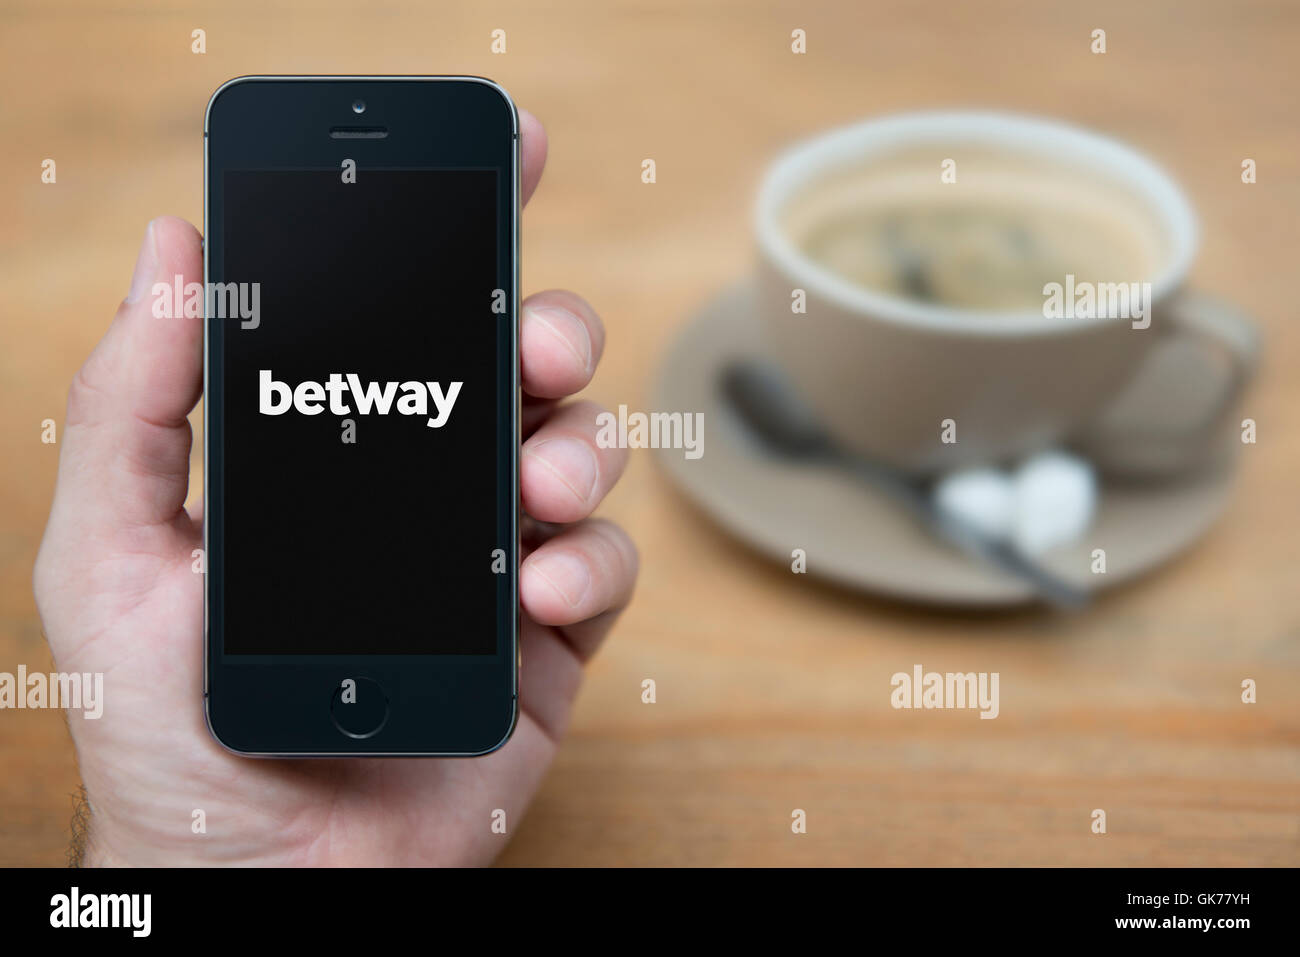 A man looks at his iPhone which displays the Betway logo, while sat with a cup of coffee (Editorial use only). Stock Photo